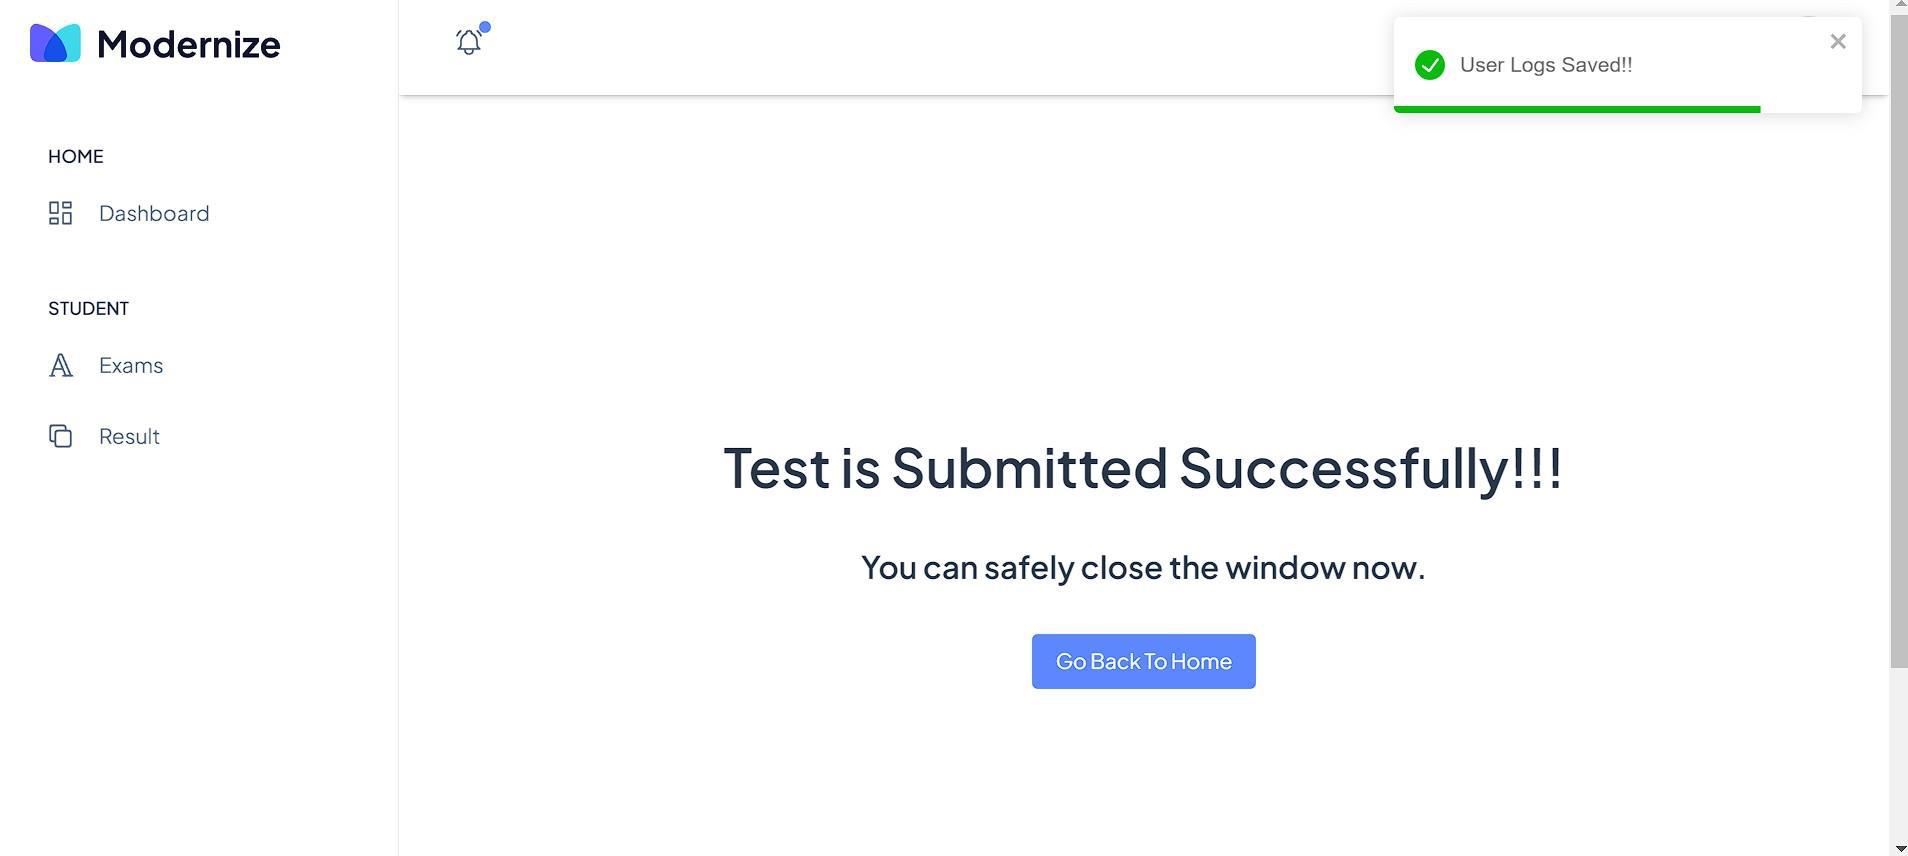 Test Submitted